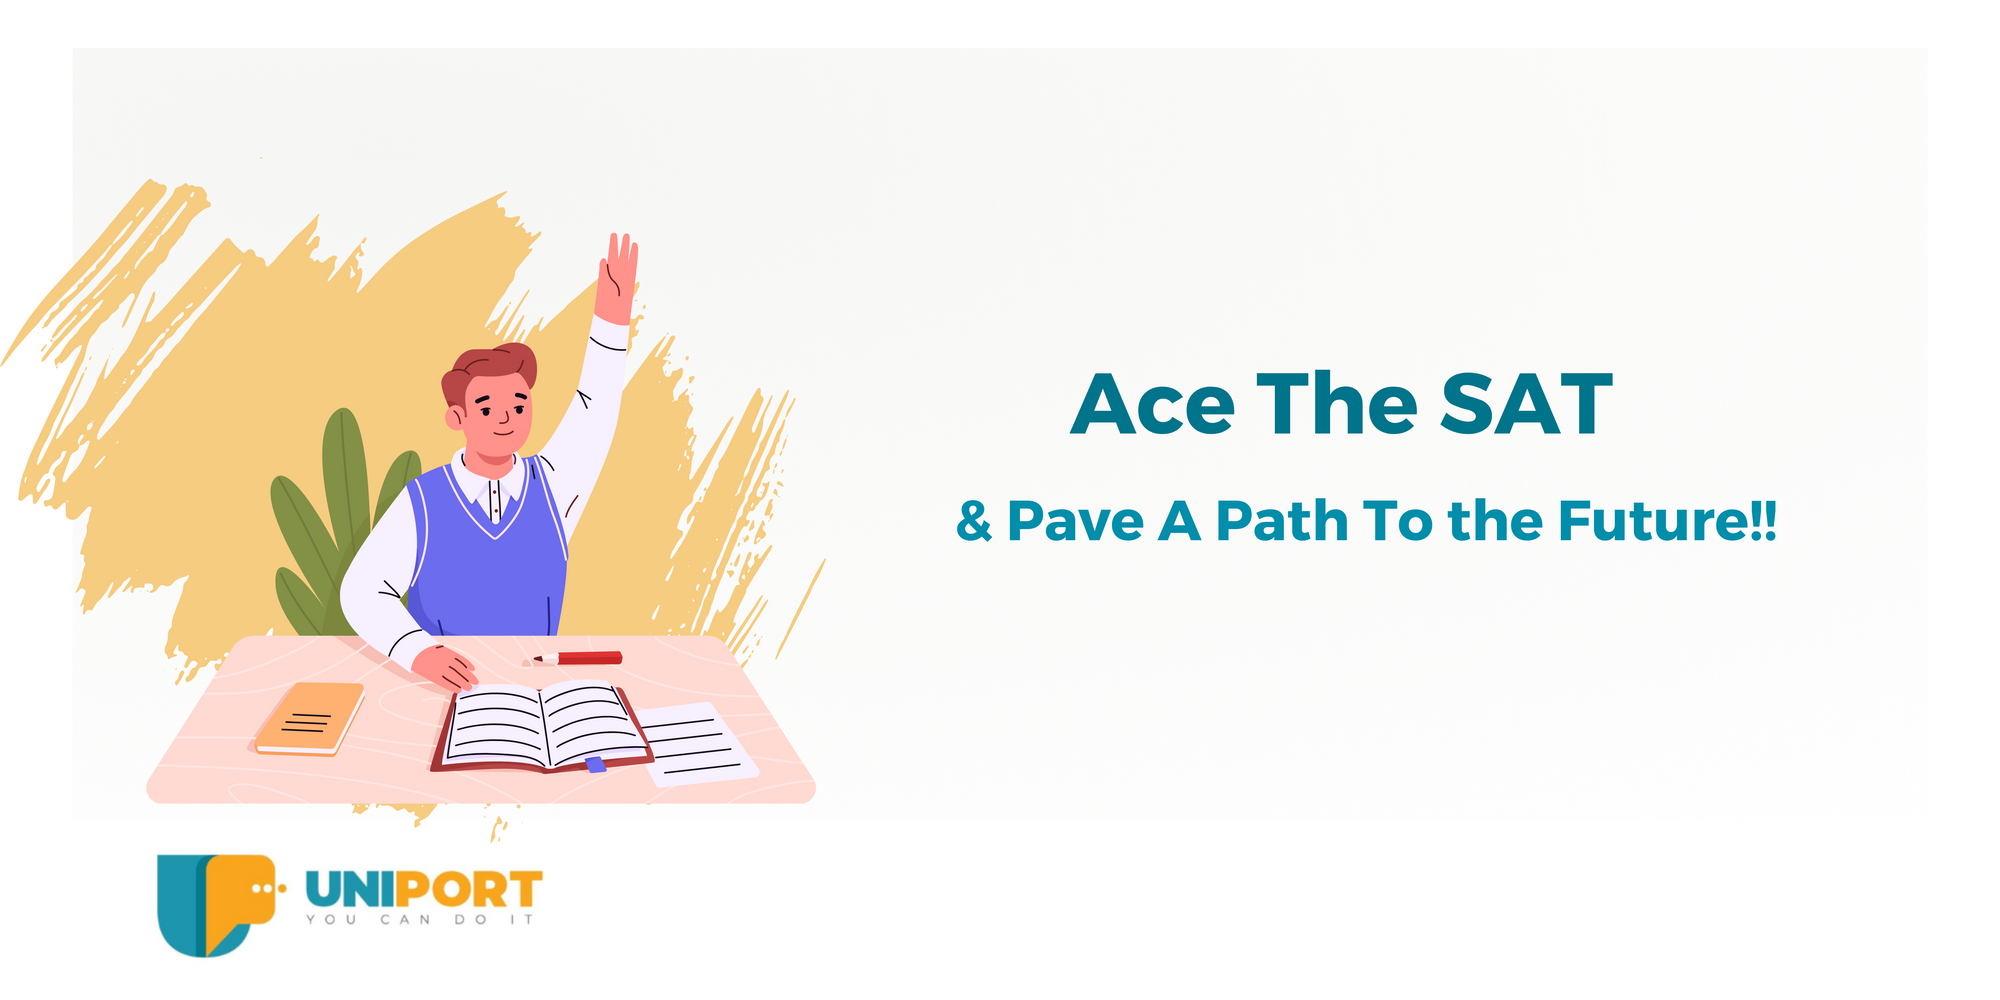 Ace The SAT & Pave a Path to the Future!!